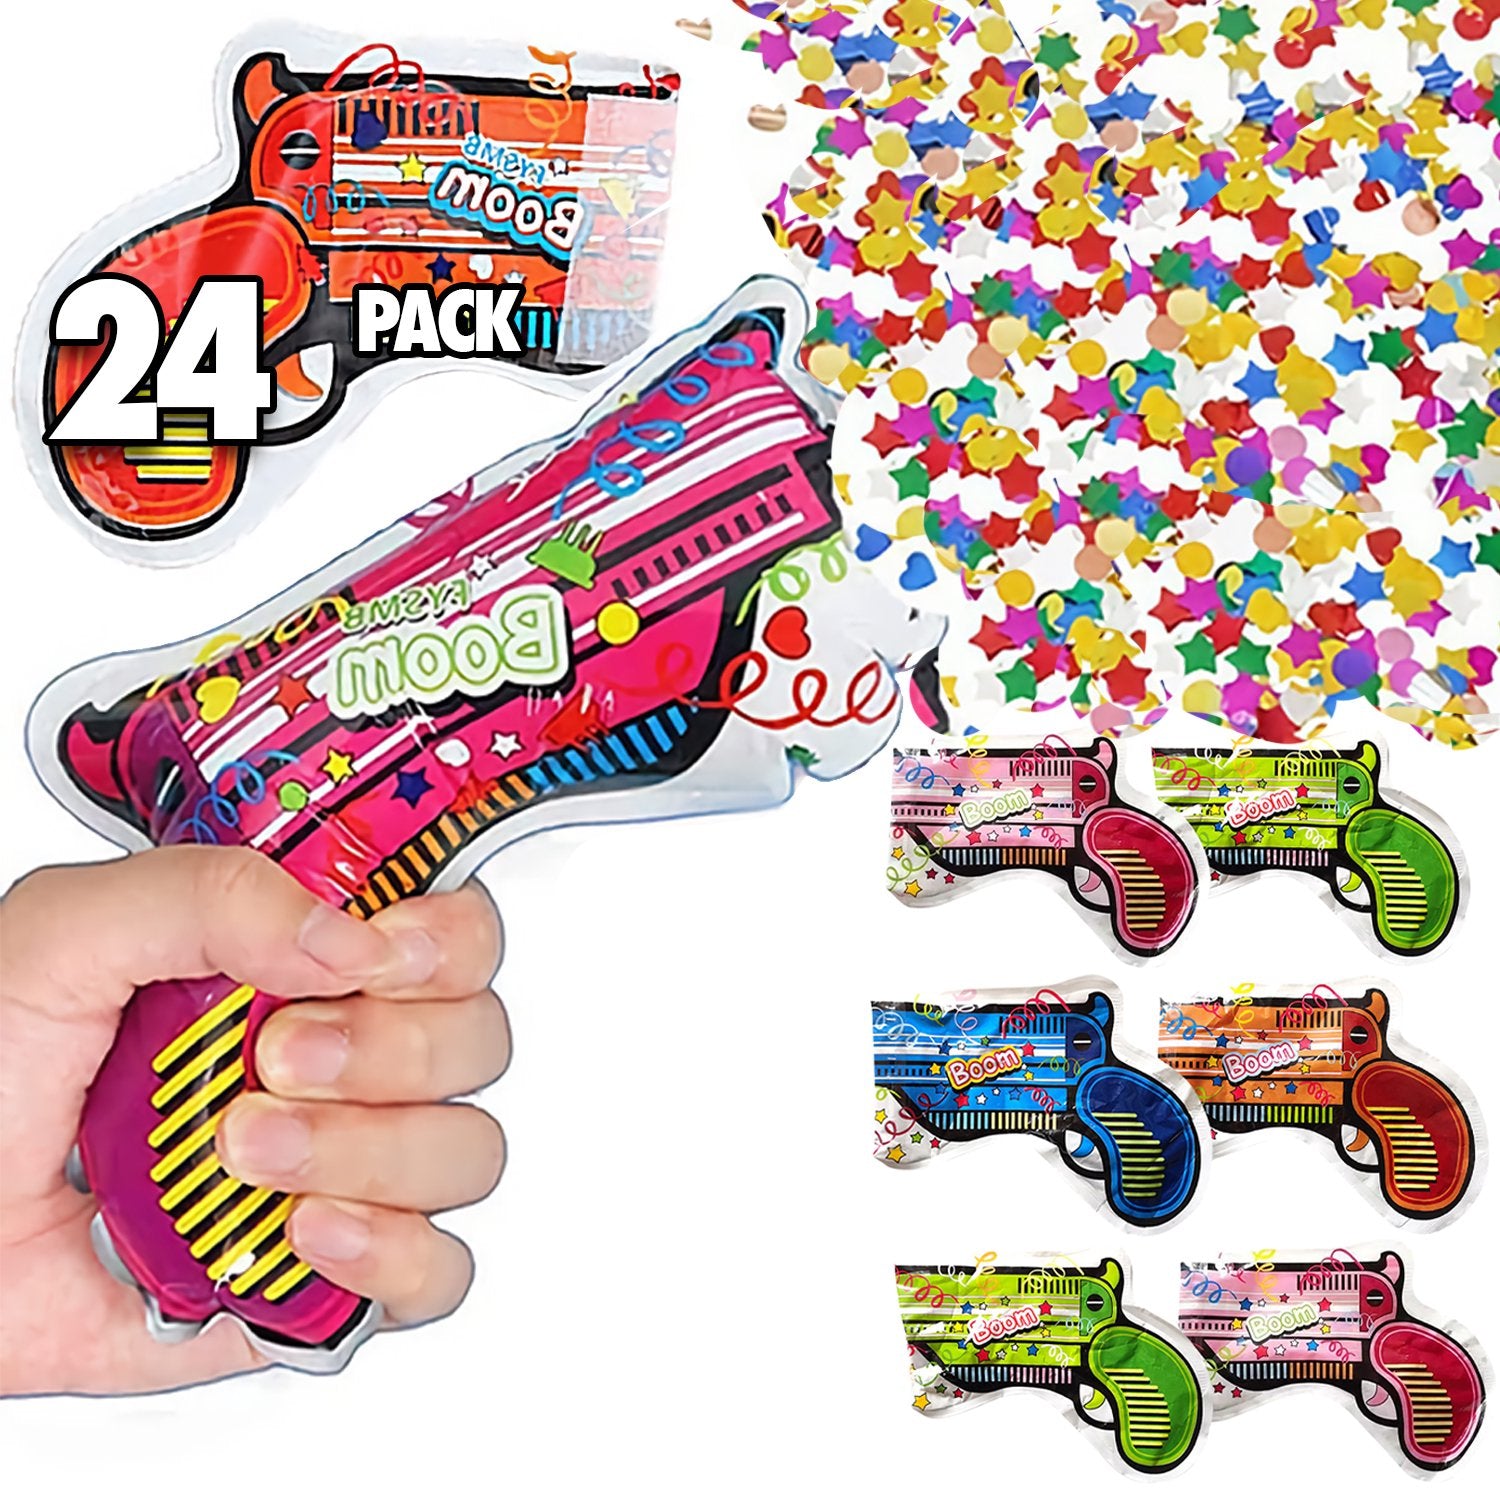 Boxgear 24 PCS Fireworks Gun, Handheld Confetti Poppers, Easy Pop, Self-Inflating Confetti Gun, Multicolor Confetti Supplies for Parties and Celebrations